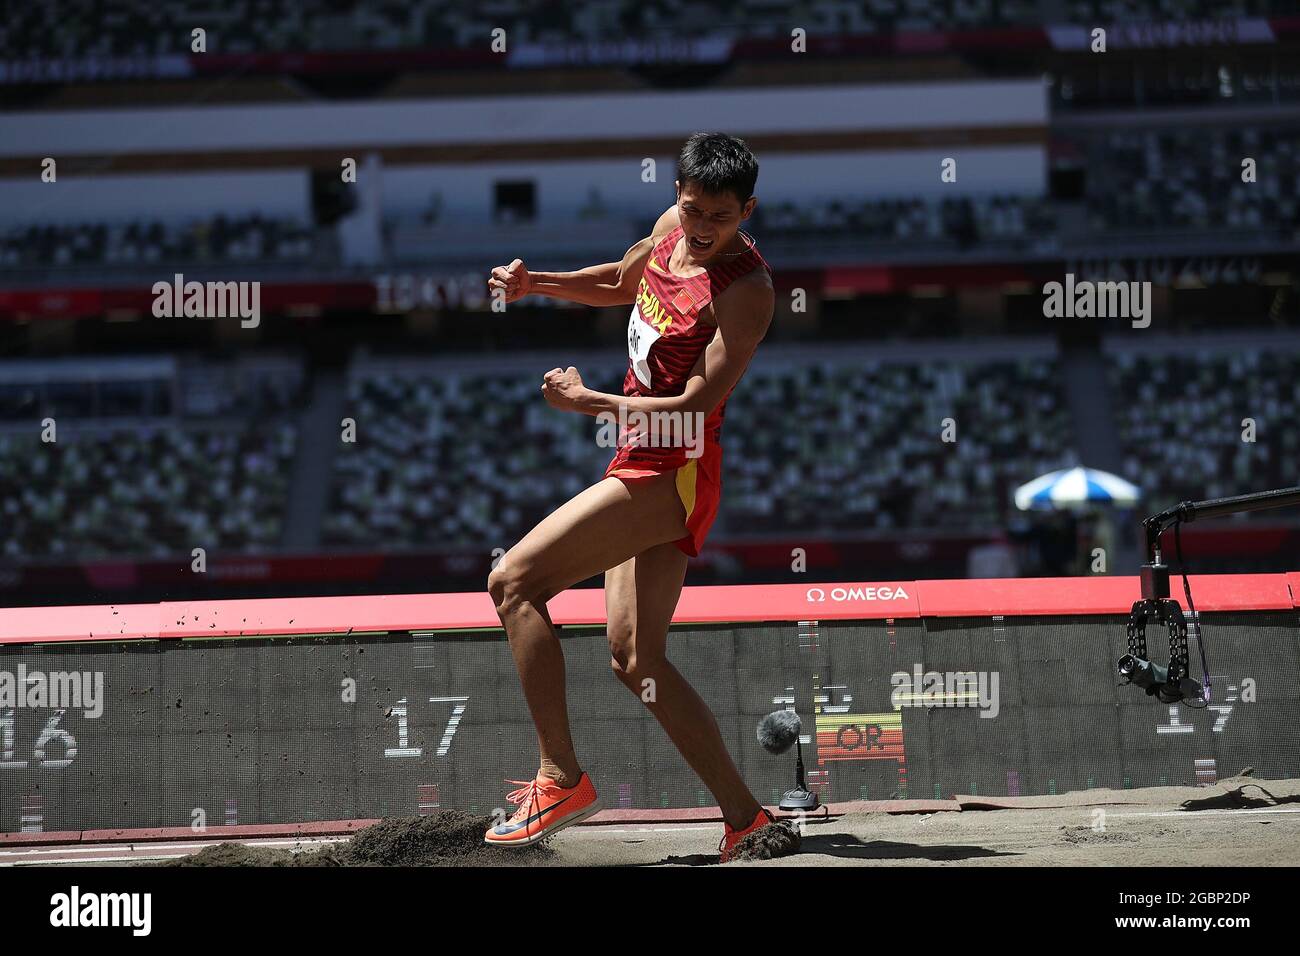 Tokyo, Japan. 5th Aug, 2021. Fang Yaoqing of China competes during the Men's Triple Jump Final at the Tokyo 2020 Olympic Games in Tokyo, Japan, Aug. 5, 2021. Credit: Li Ming/Xinhua/Alamy Live News Stock Photo